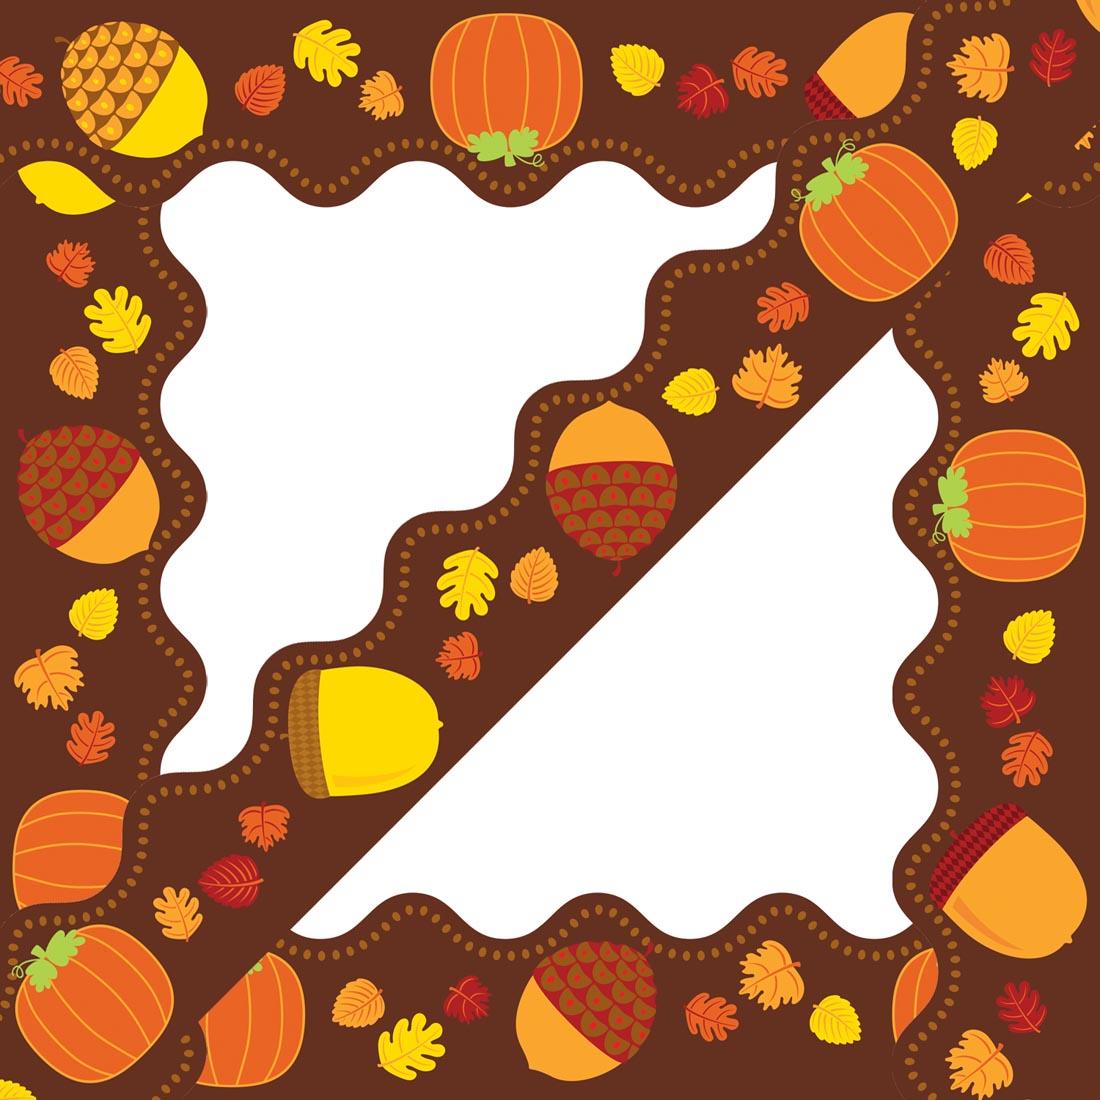 Acorns, Pumpkins and Fall Leaves on a Scalloped Border